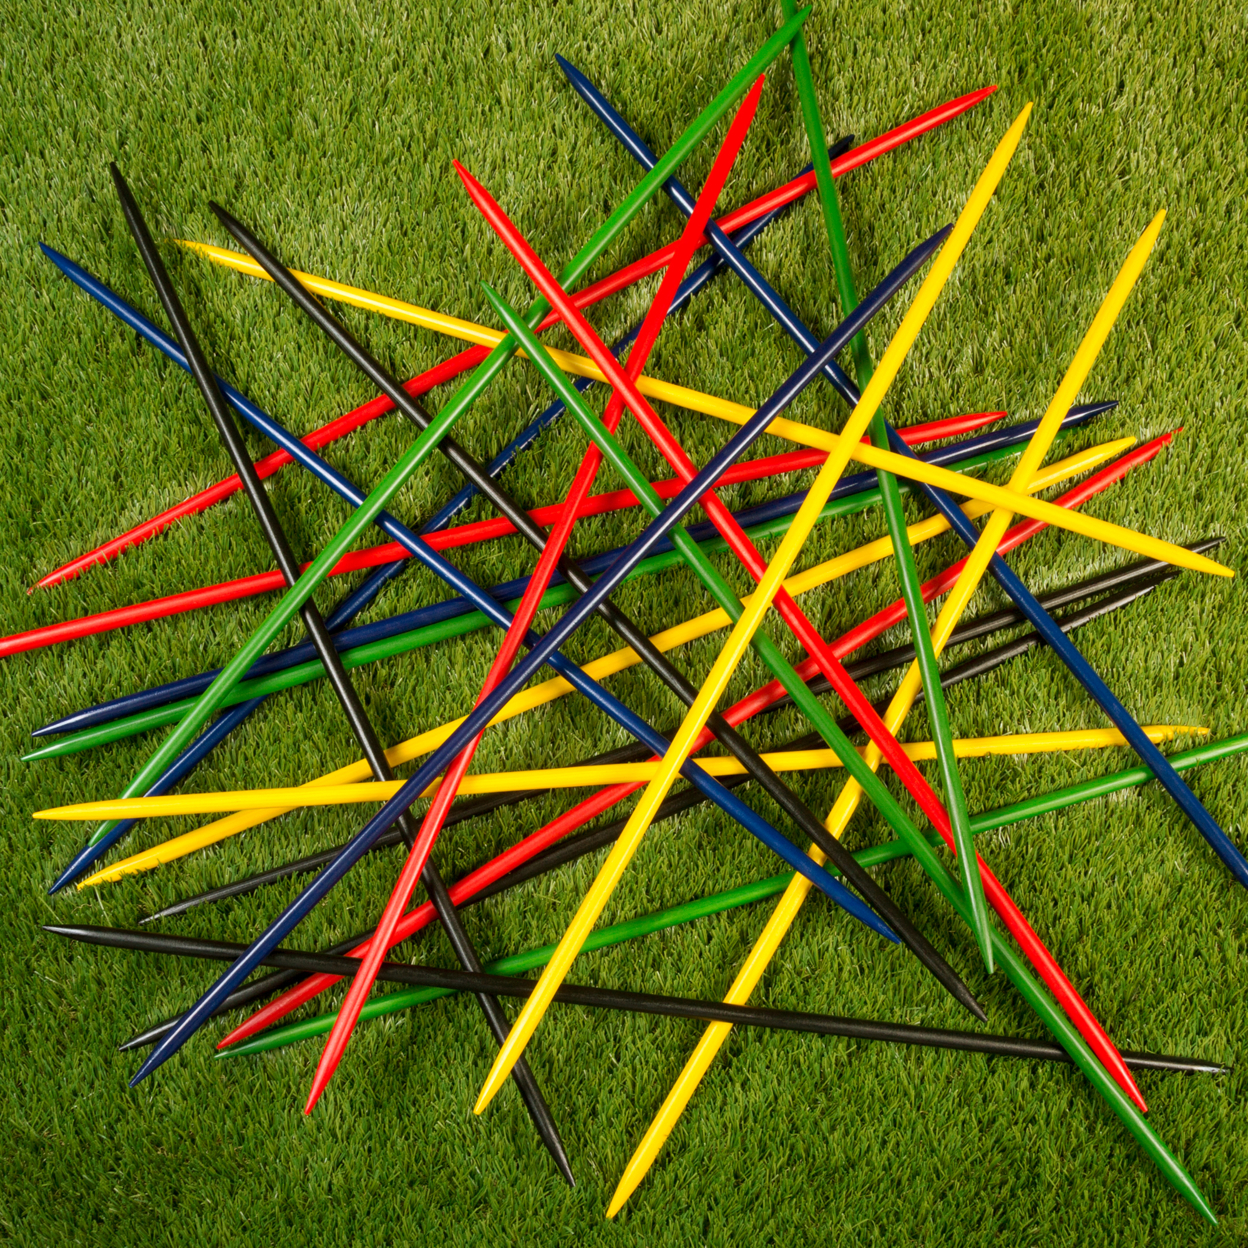 Jumbo Pick Up Sticks Set Of 25 Colorful 31 Inch Long Kids Game Indoor Outdoor